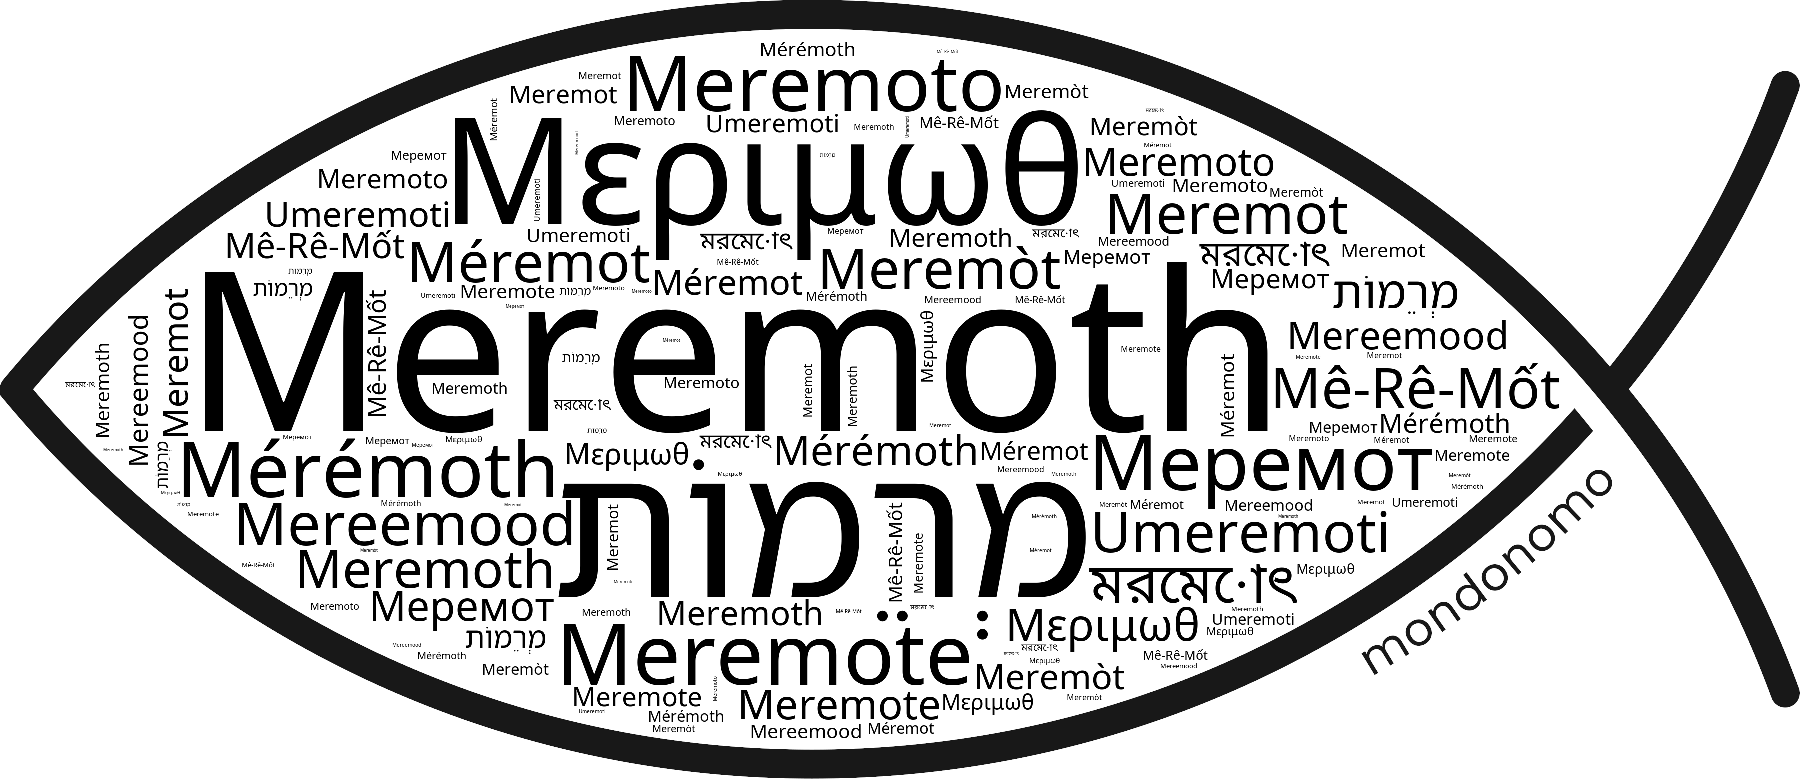 Name Meremoth in the world's Bibles